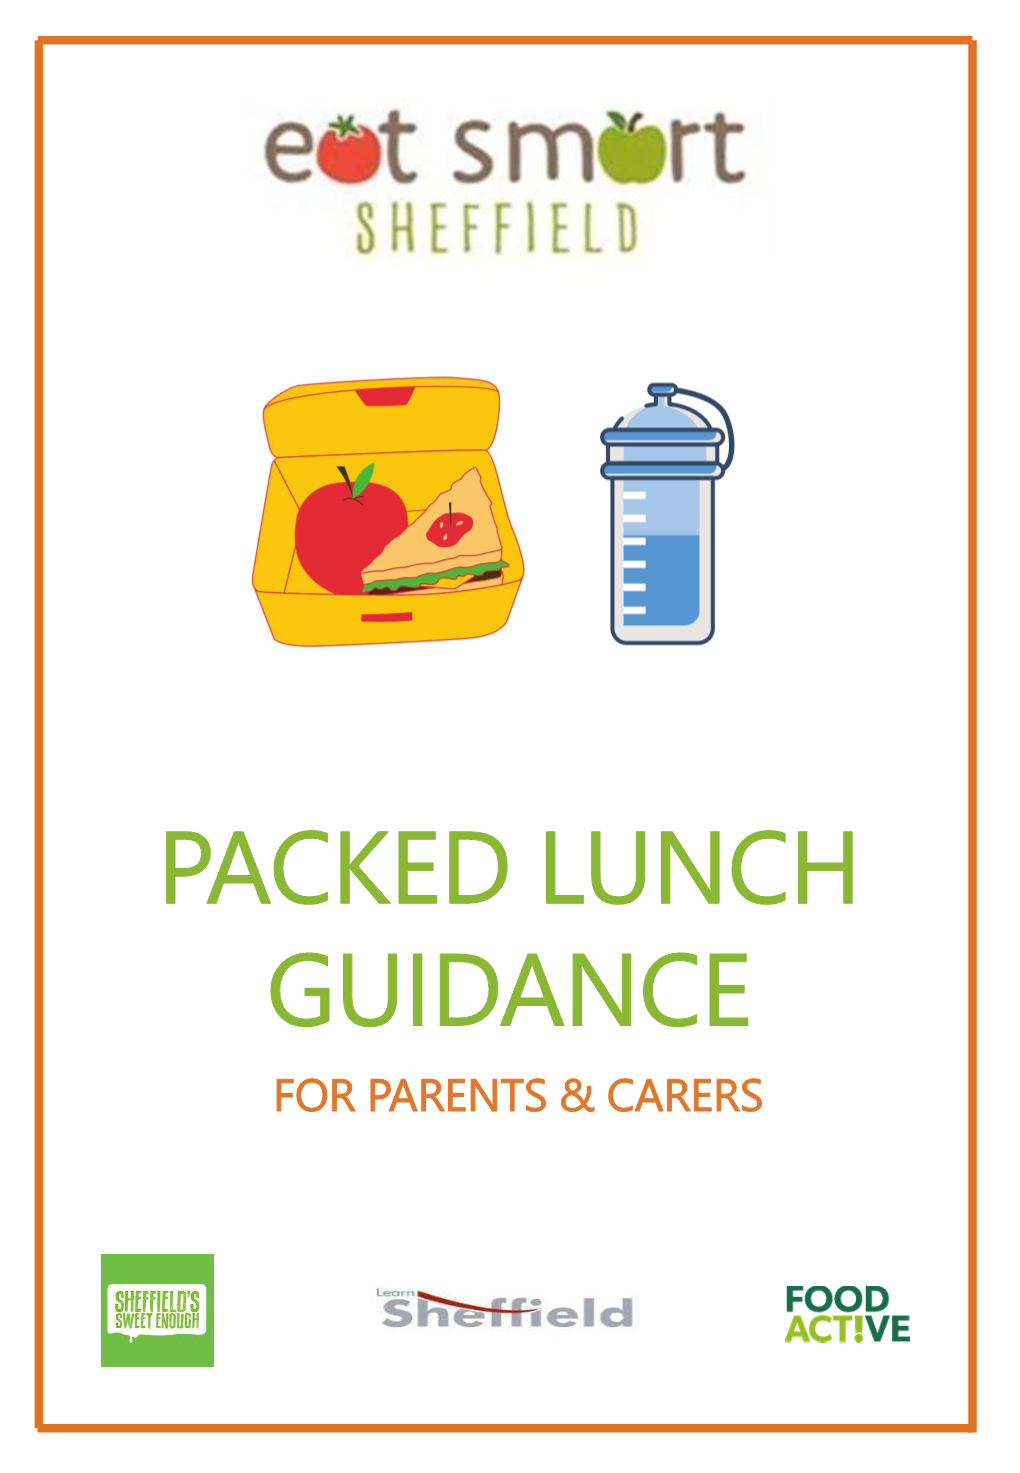 Packed Lunch Guidance for Parents & Carers Contents